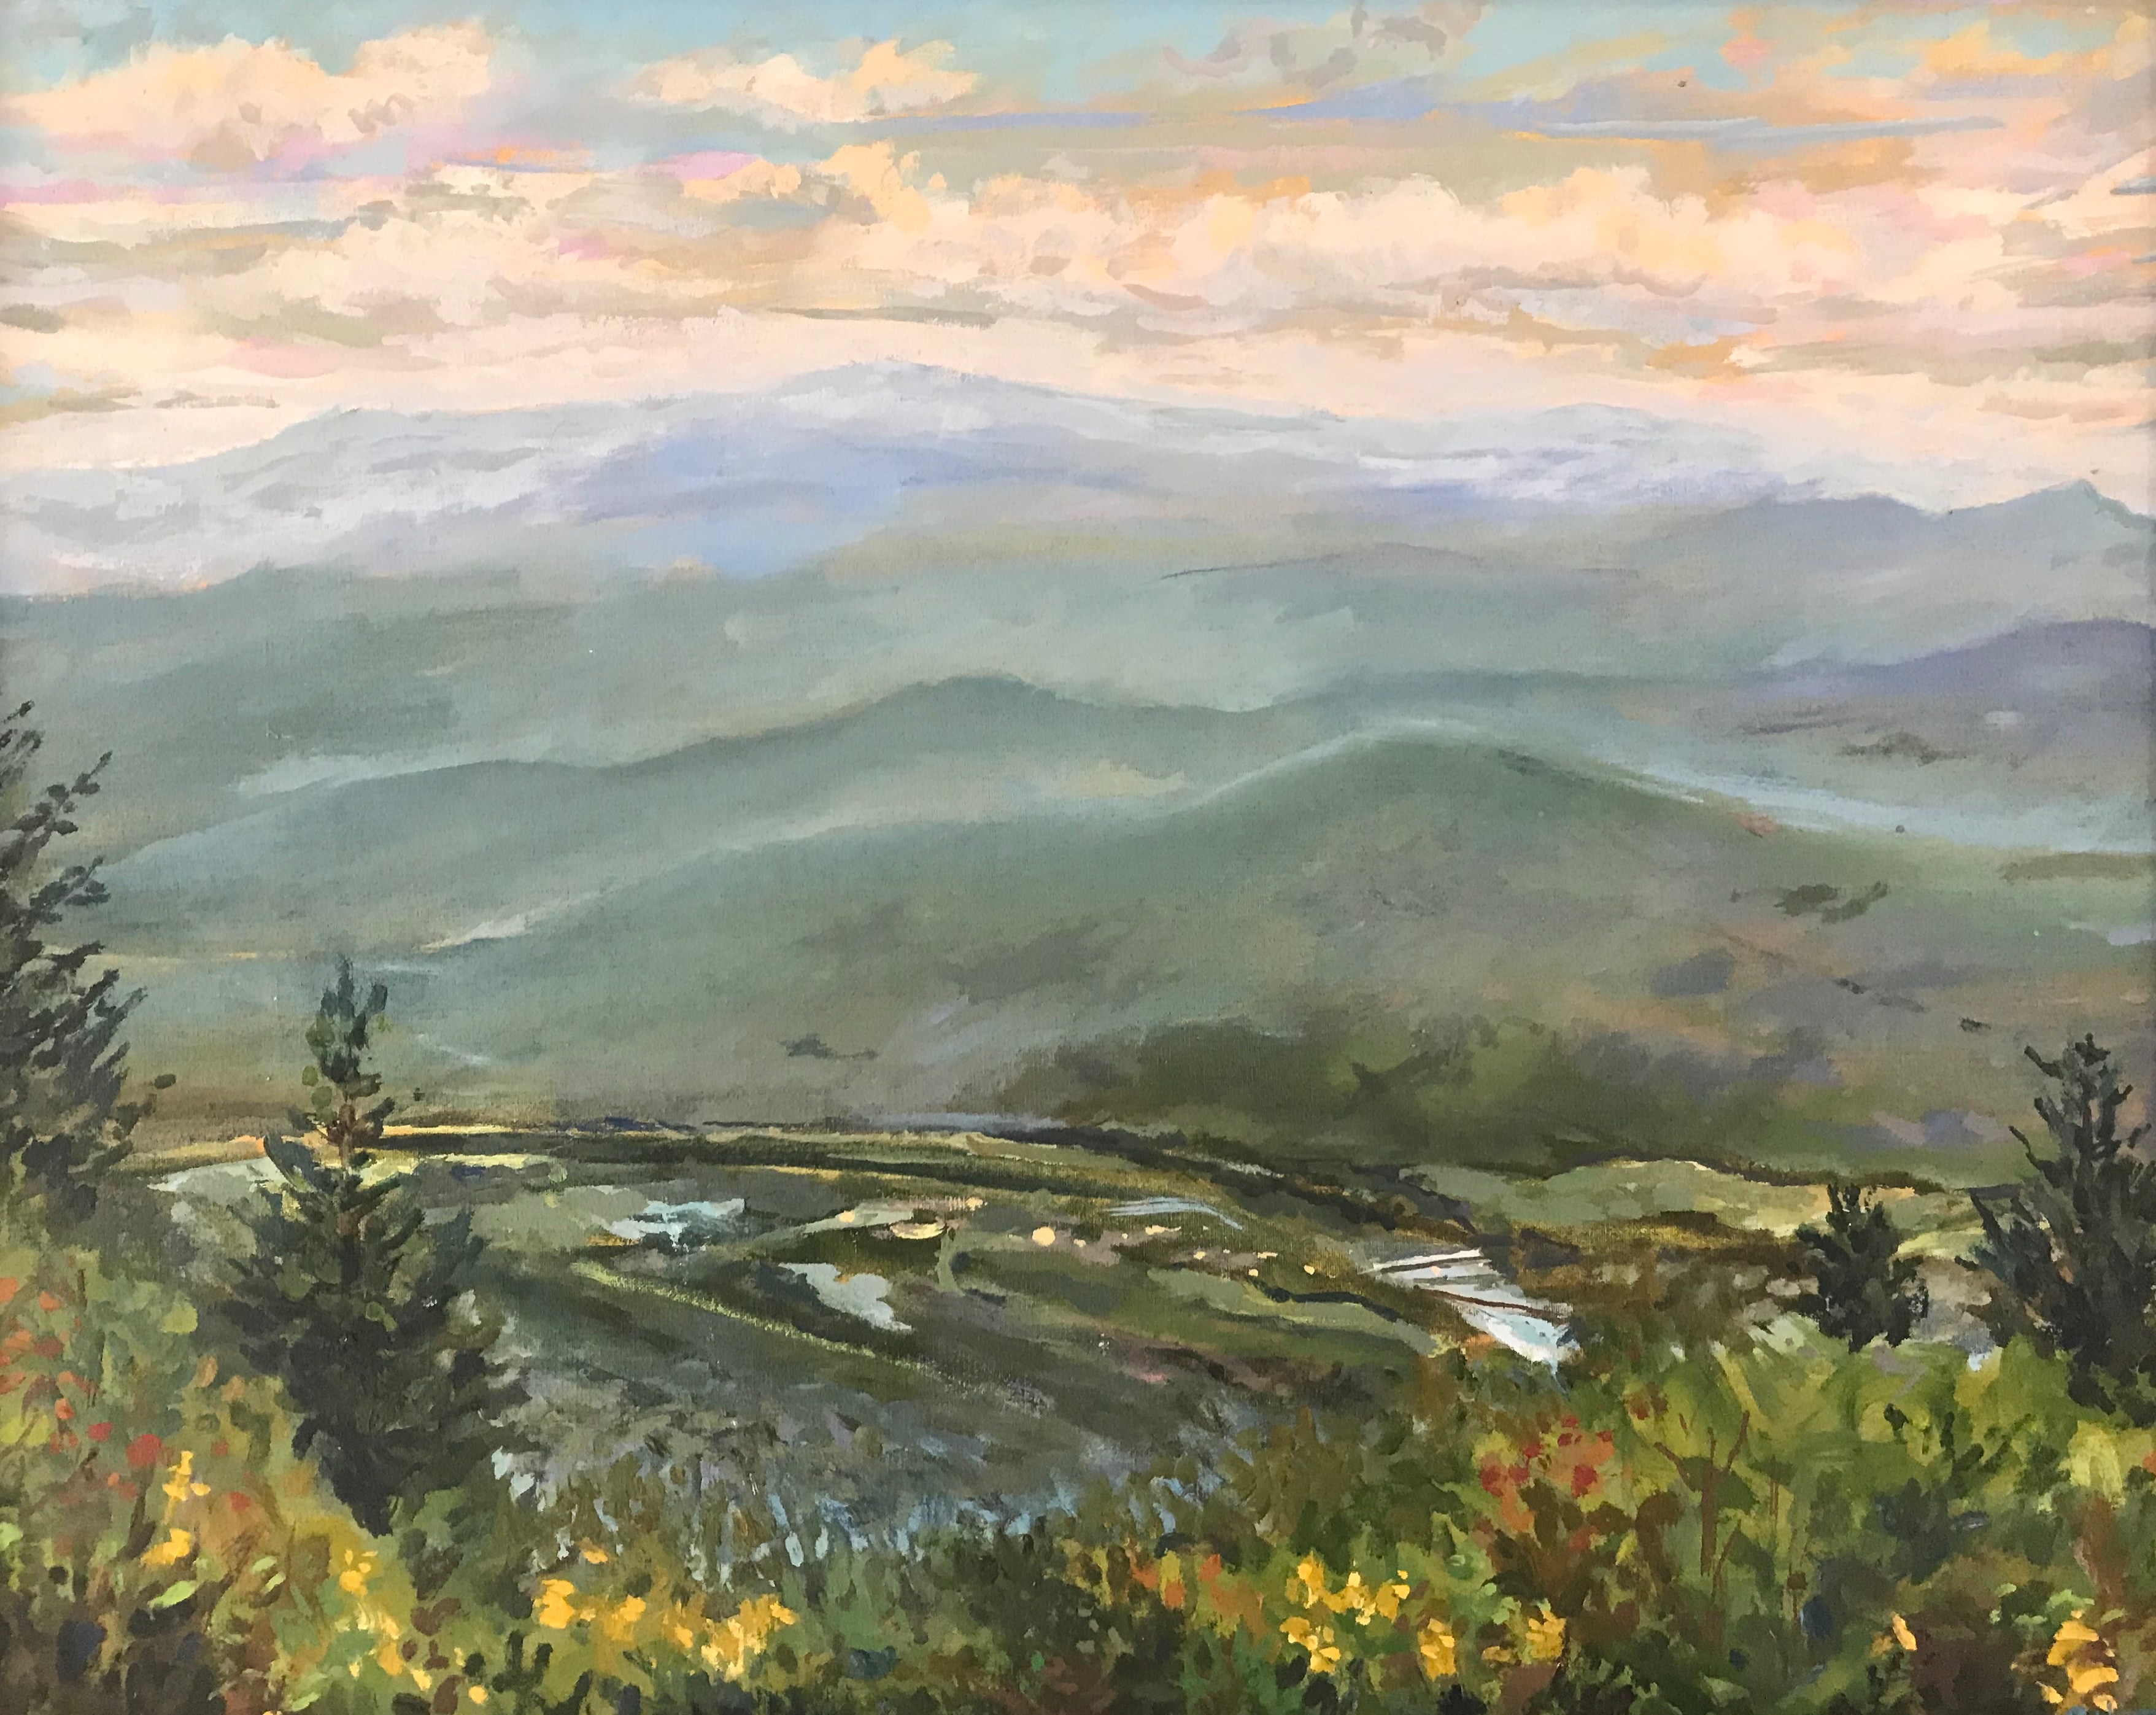 [View from Top of Ascutney Mountain]